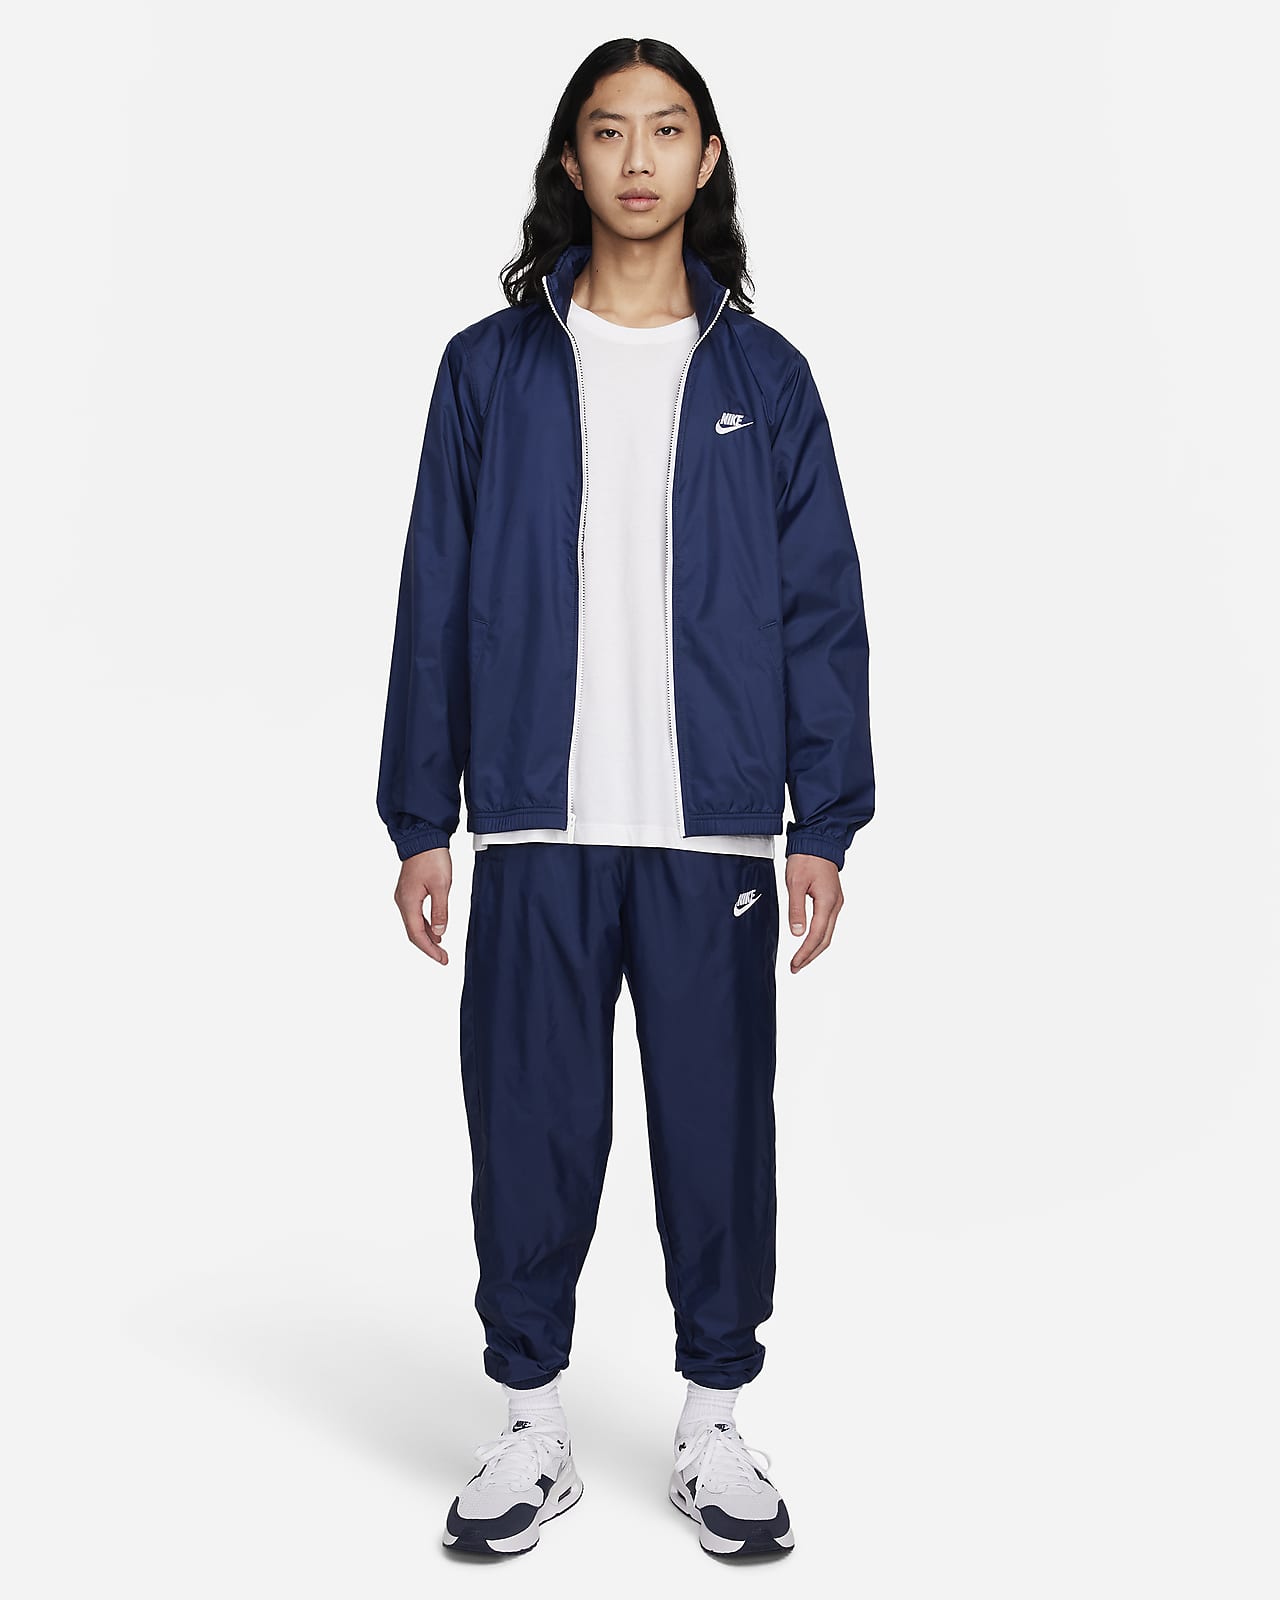 https://static.nike.com/a/images/t_PDP_1280_v1/f_auto,q_auto:eco/c0cafbec-cd6a-434d-b788-5c33f205a20e/sportswear-club-mens-lined-woven-track-suit-Q72HP3.png